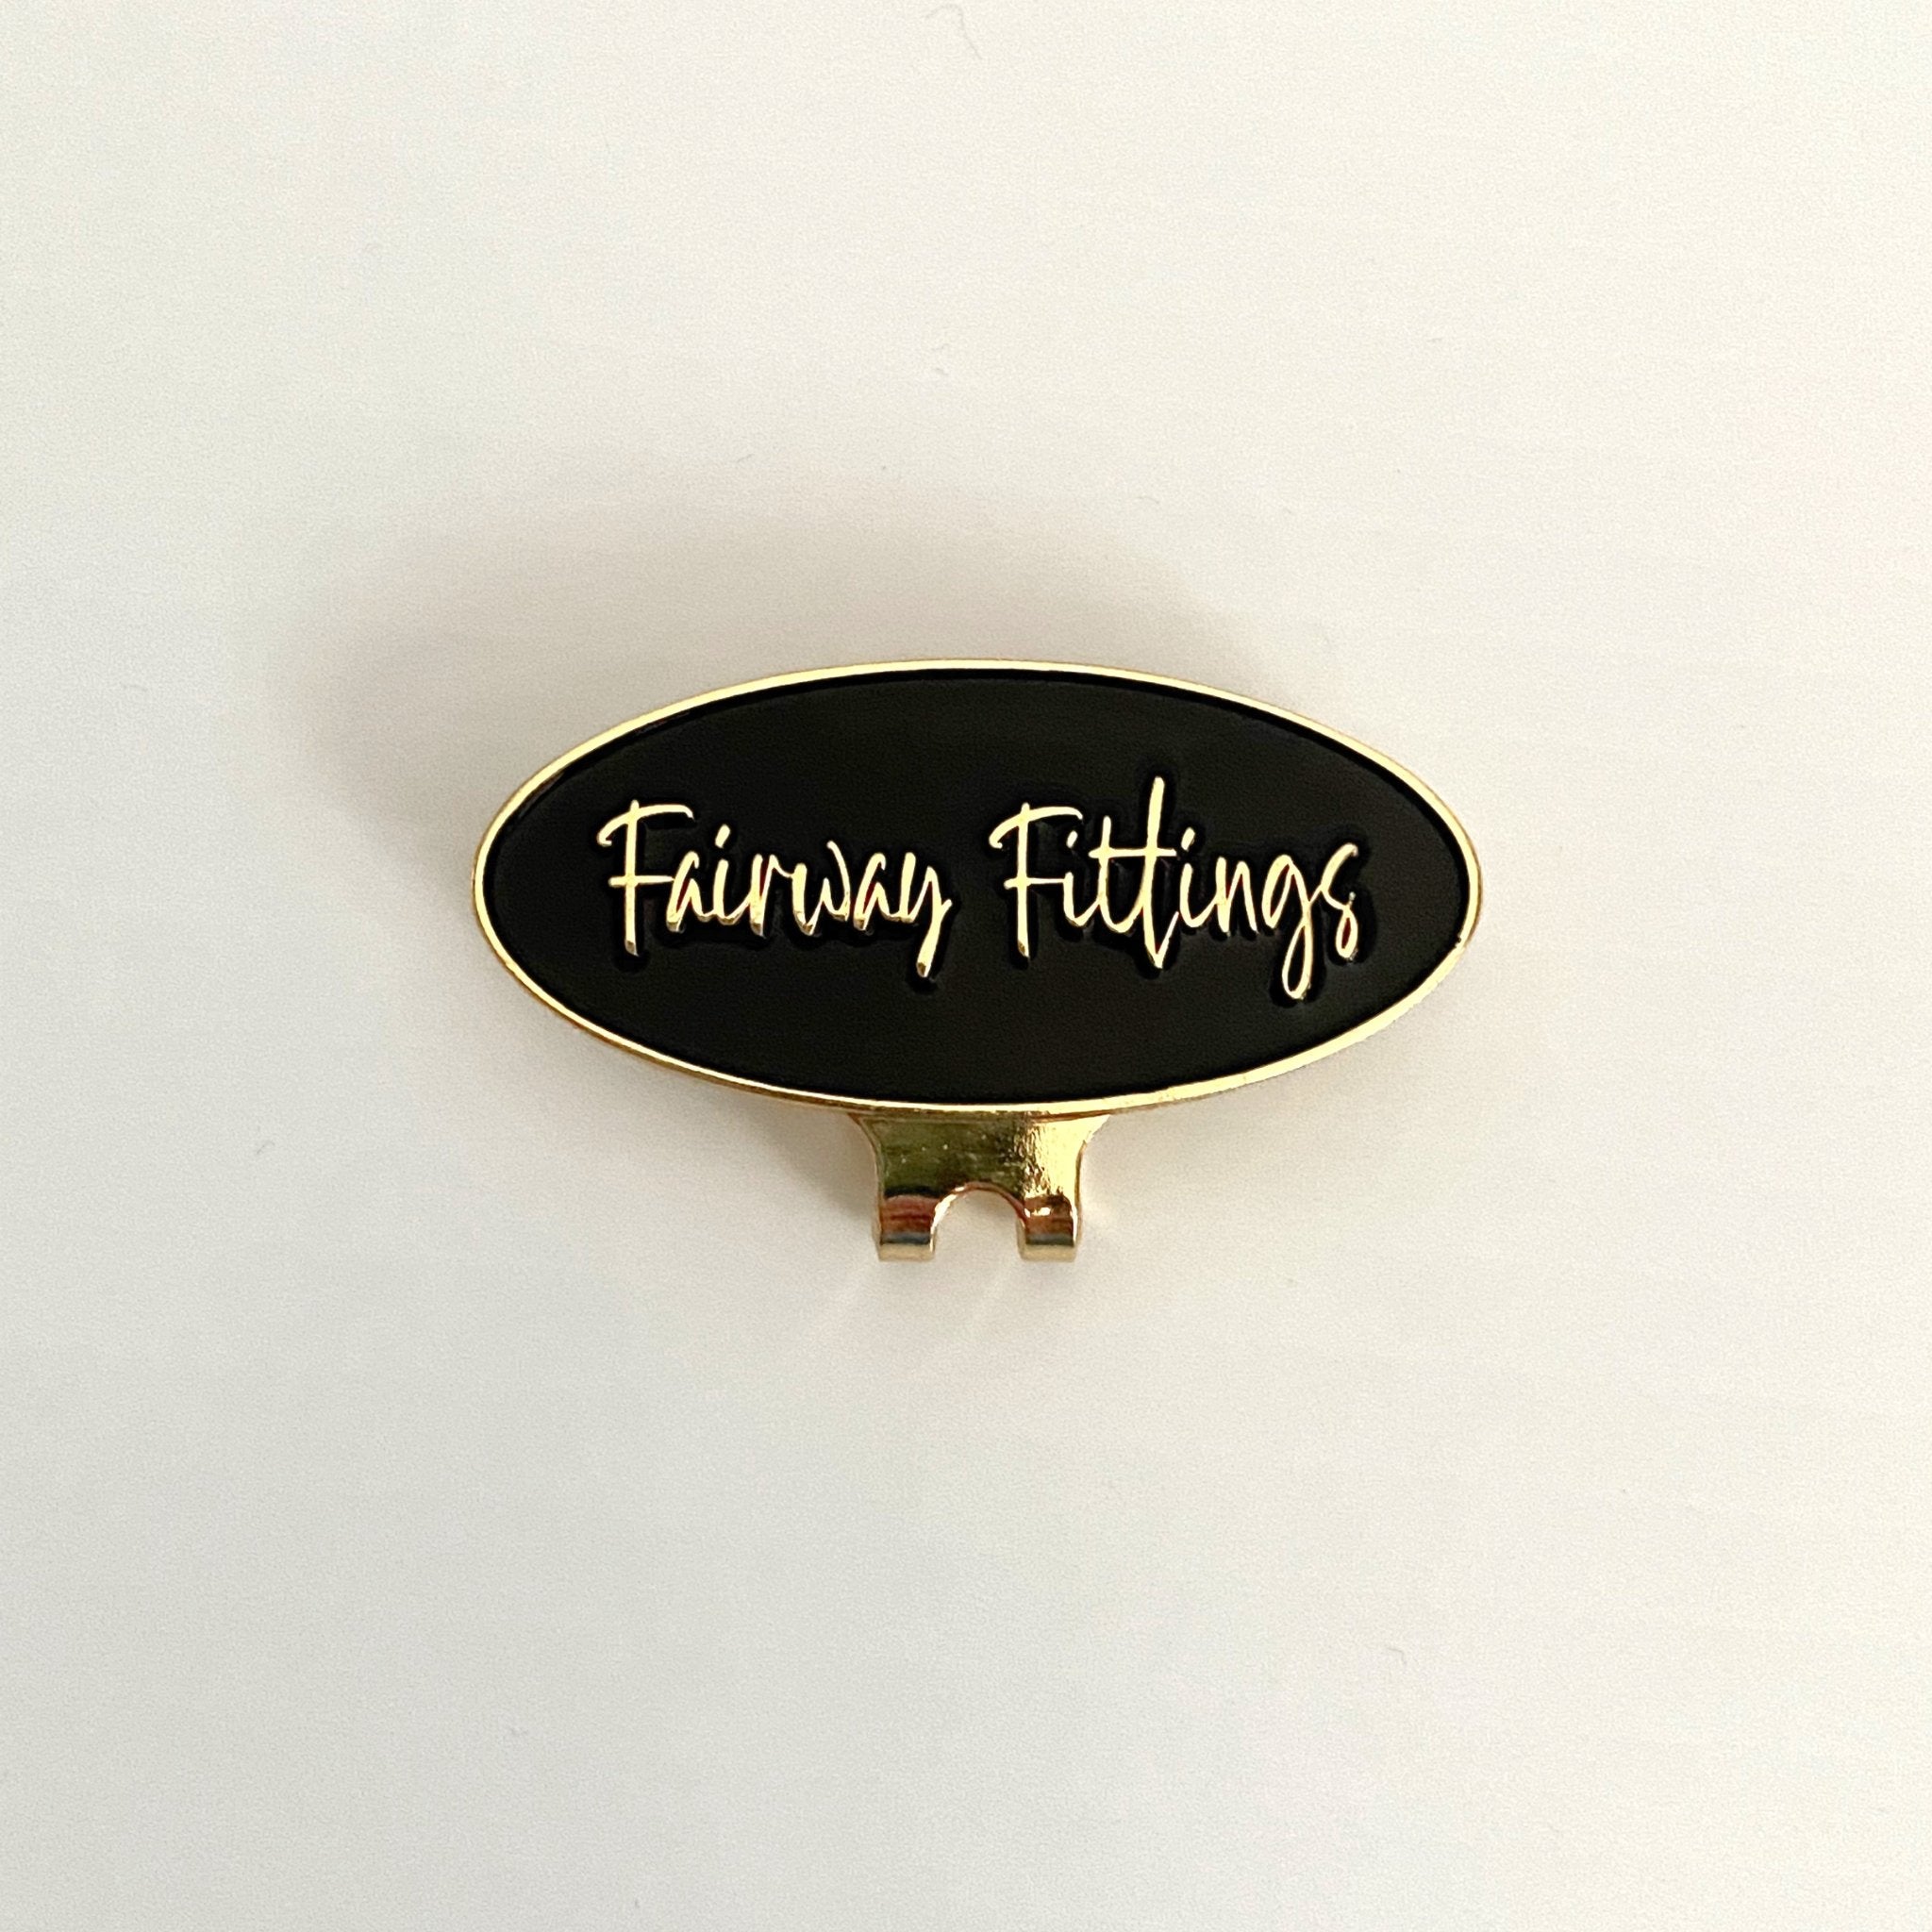 Fairway Fittings - Hat Clip with Magnetic Ball Marker. Fairway Fittings - Women's Golf & Athleisure Wear Boutique.